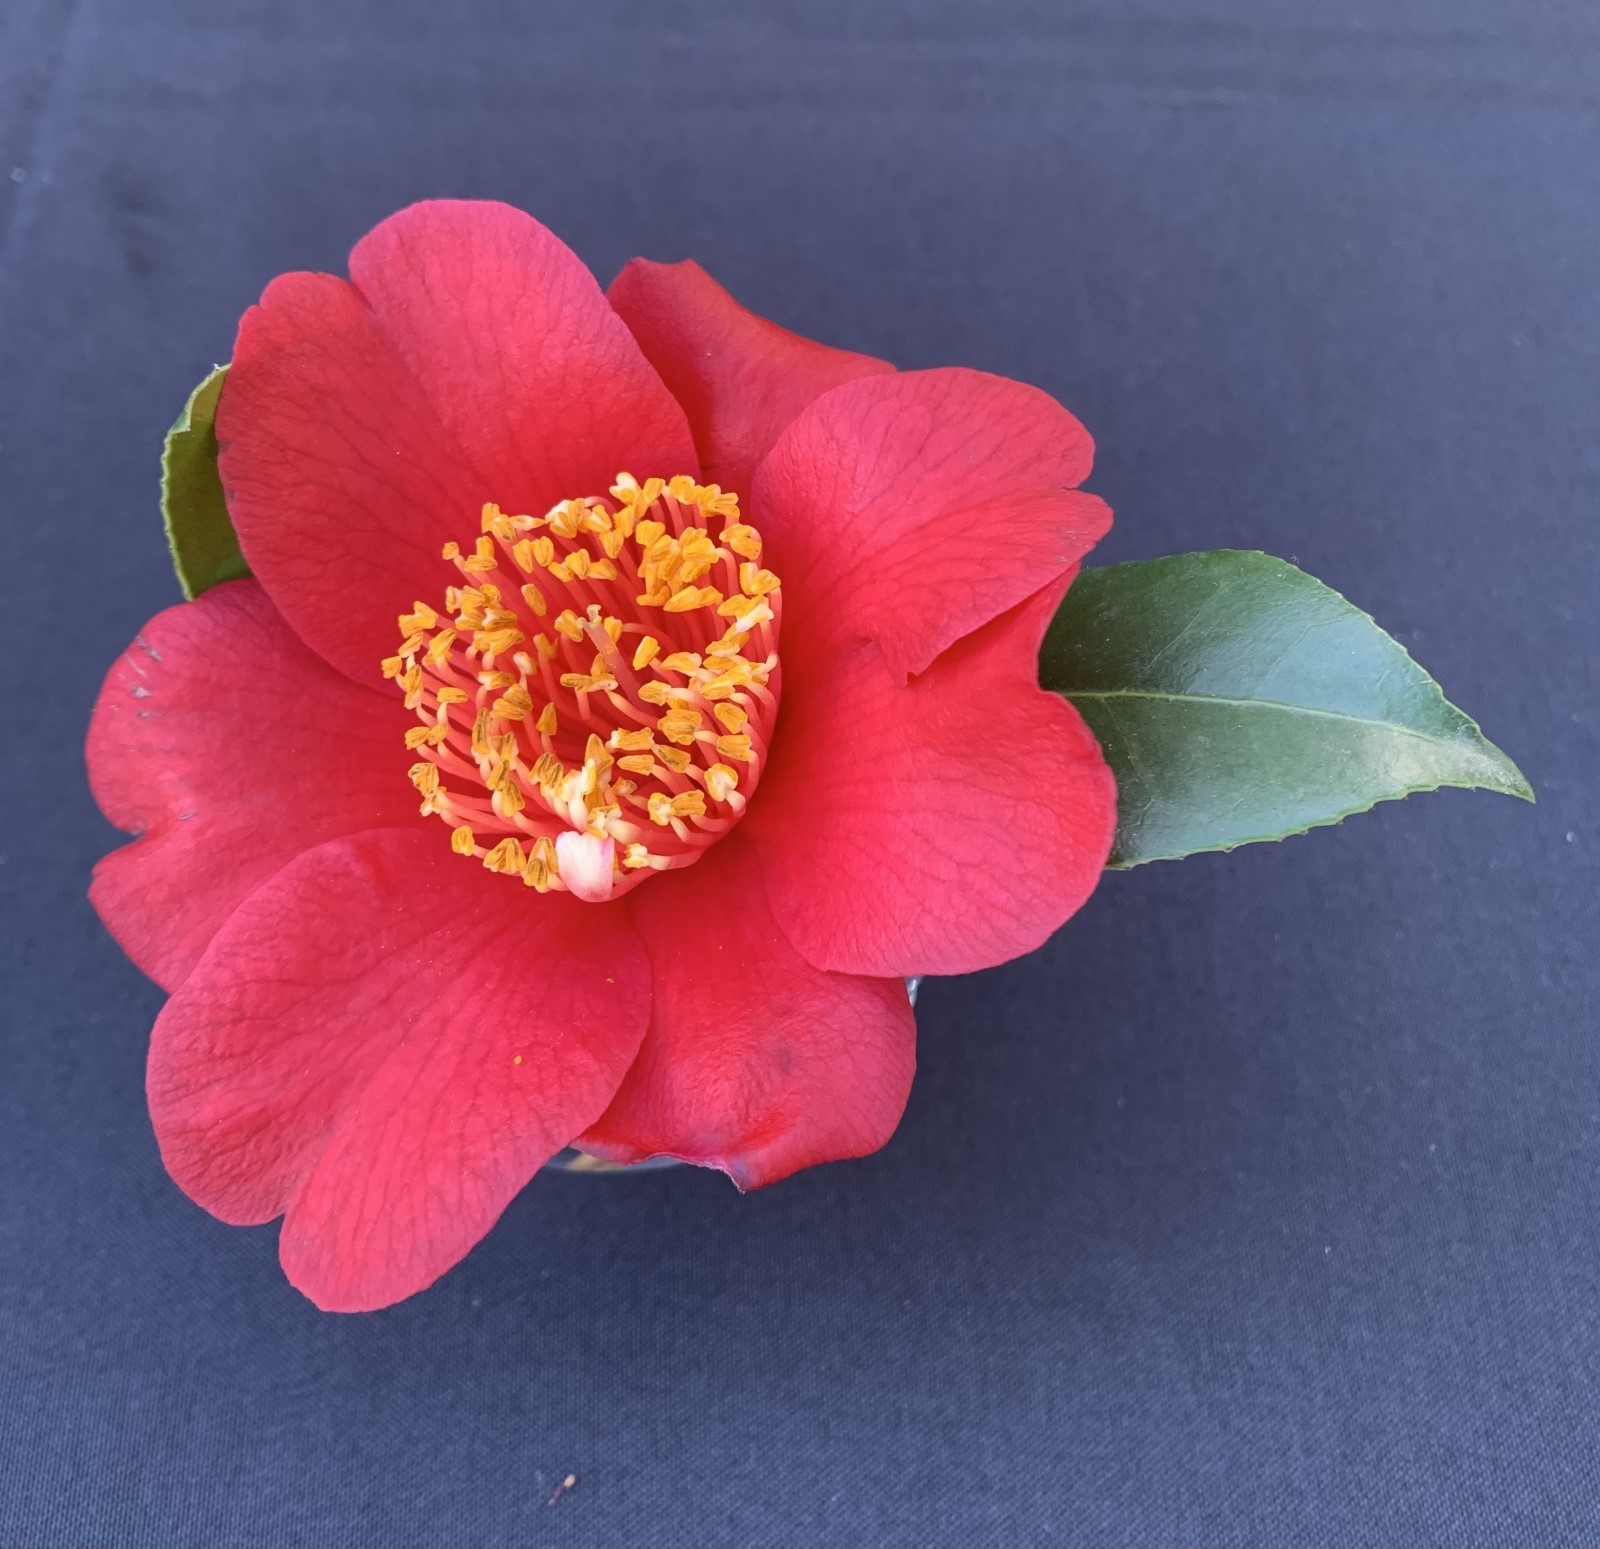 Talk and Demonstration - Camellia Flower Arranging for the Home | Sherman Library & Gardens